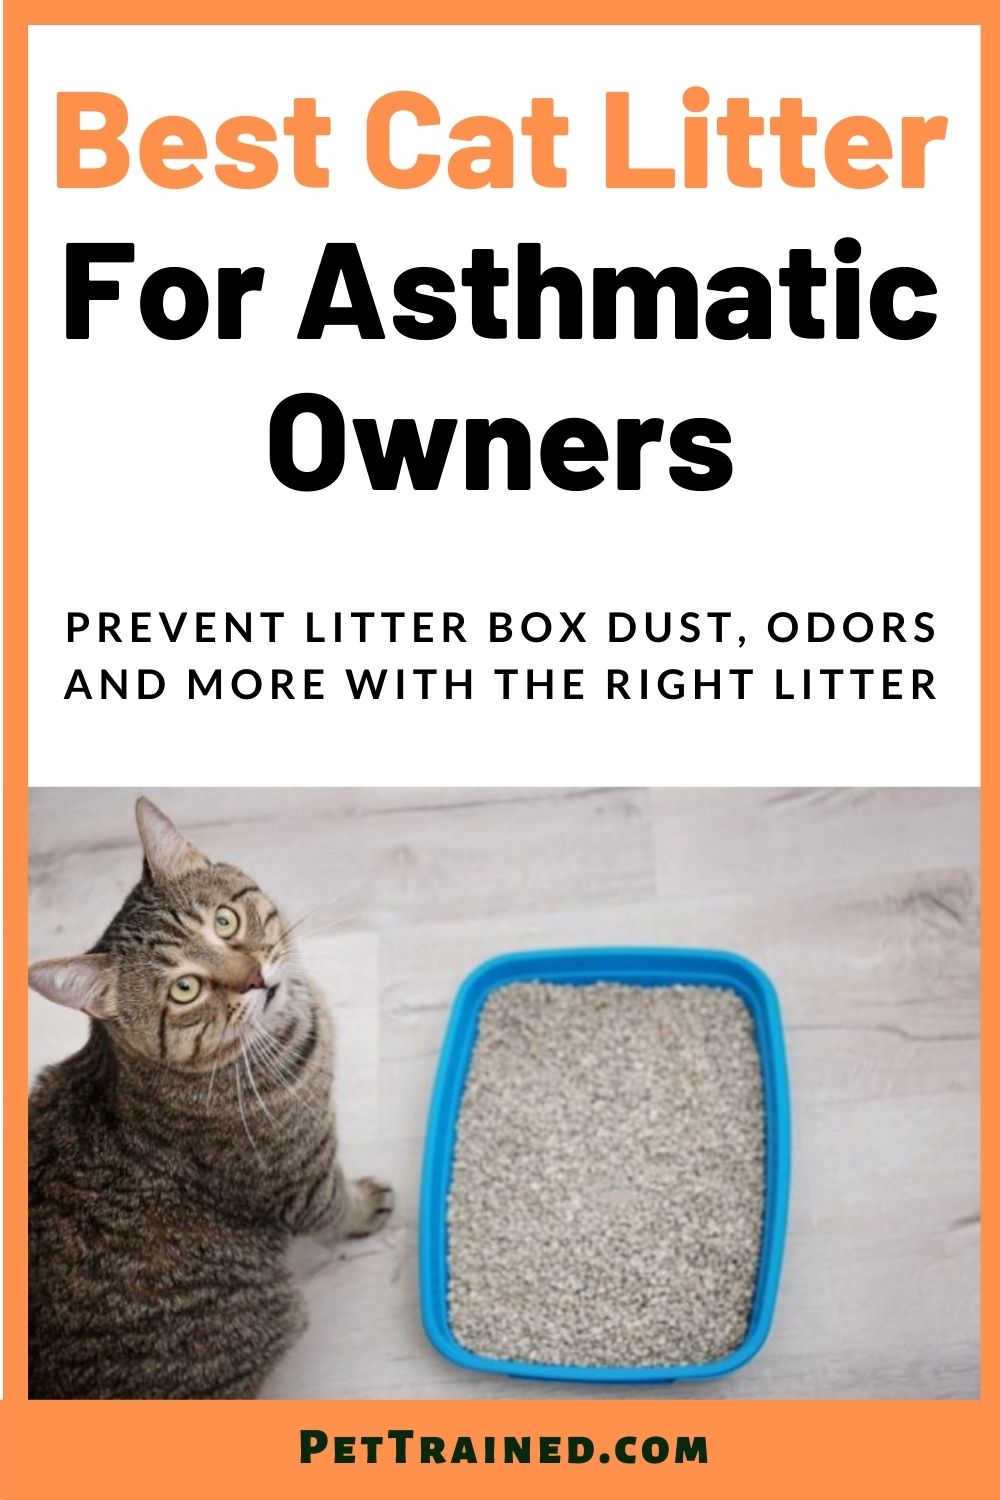 Best cat litter for cat owners with asthma